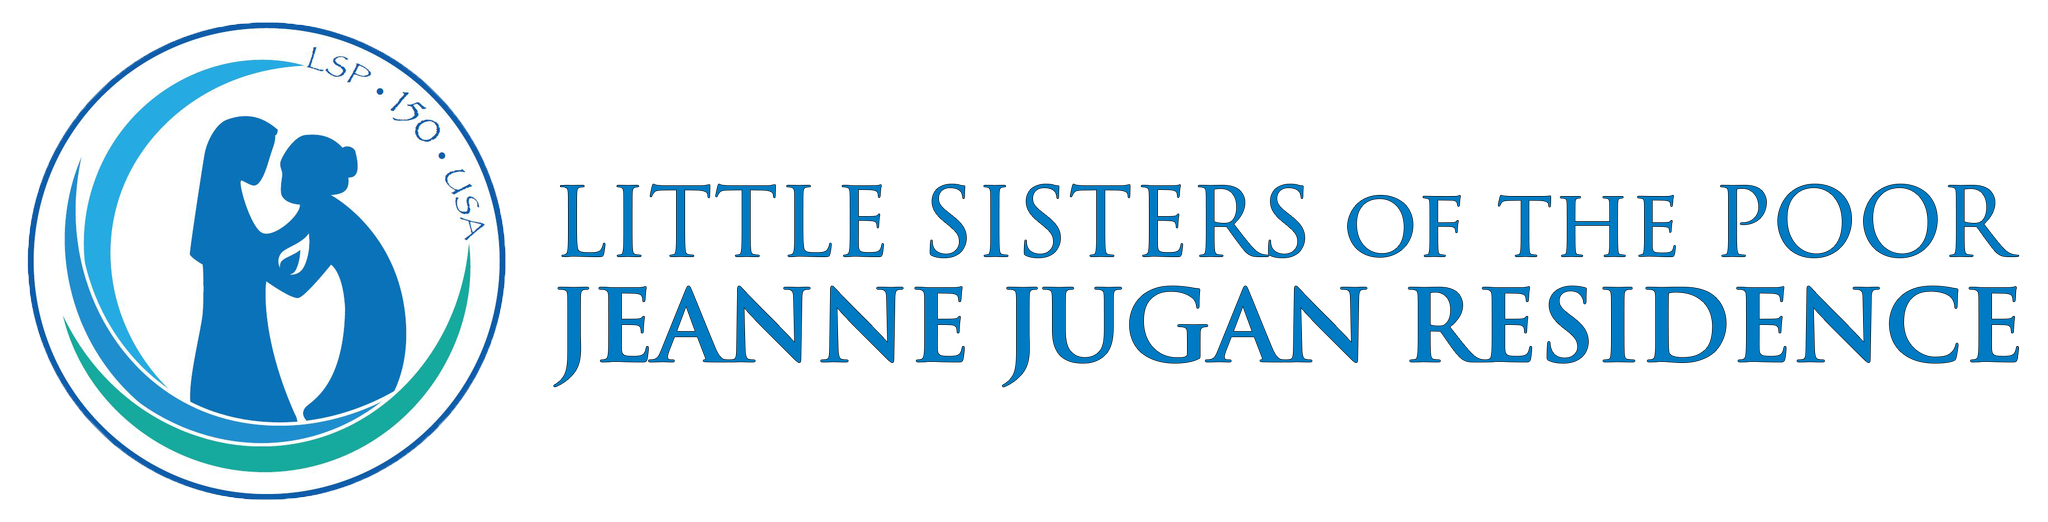 Little Sisters of the Poor Washington DC